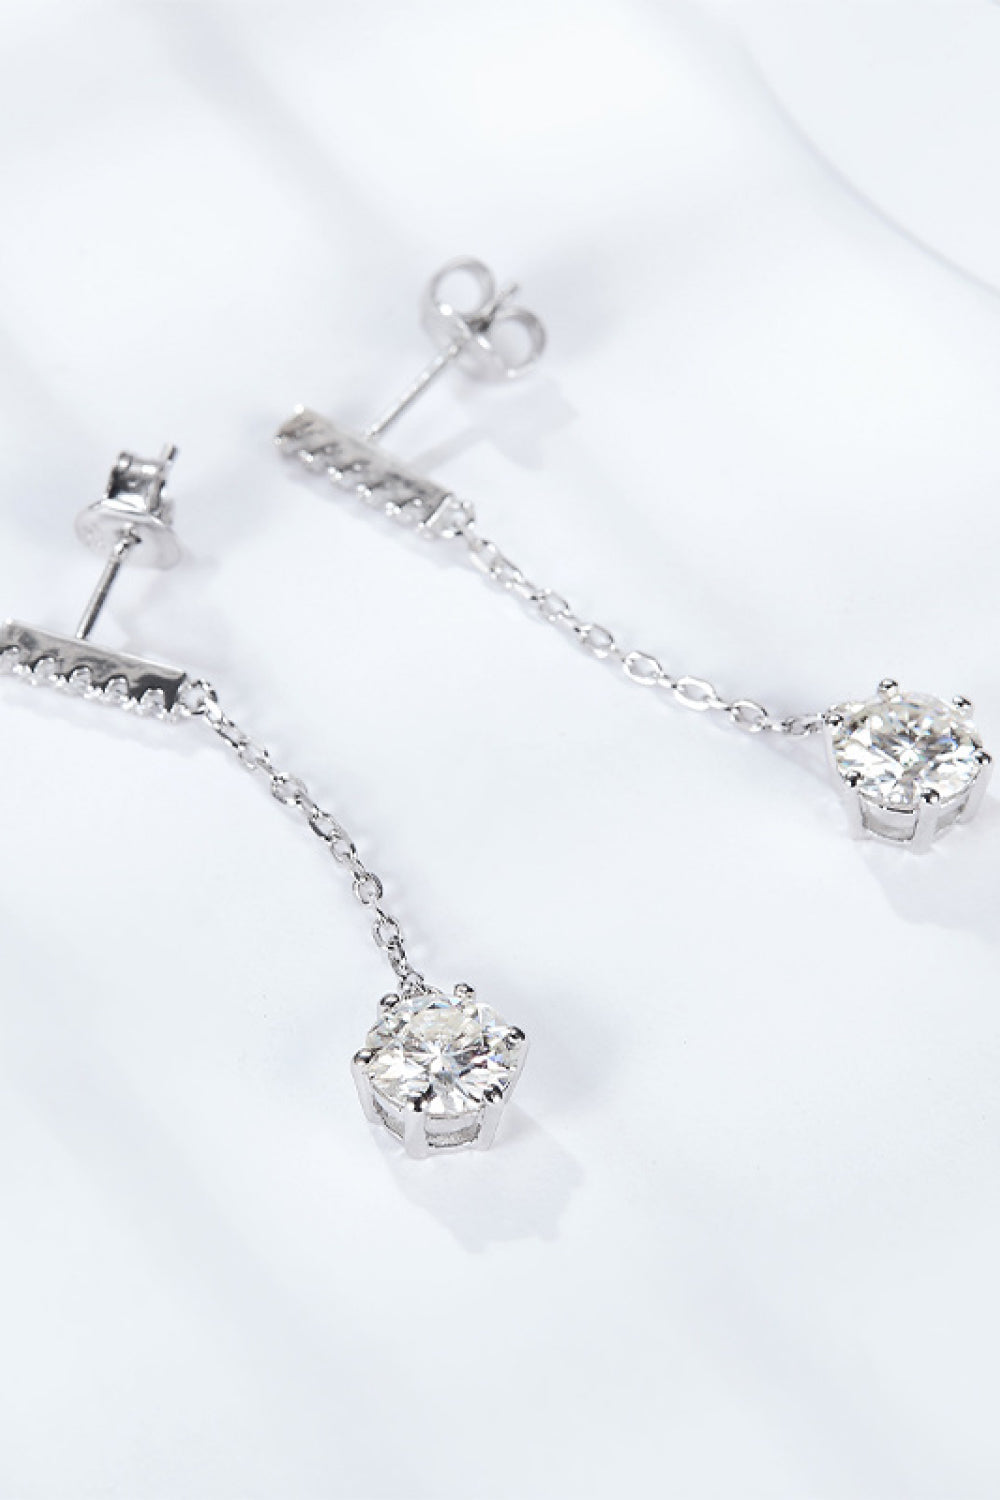 6-Prong Round Moissanite Drop Earrings - Dash Trend